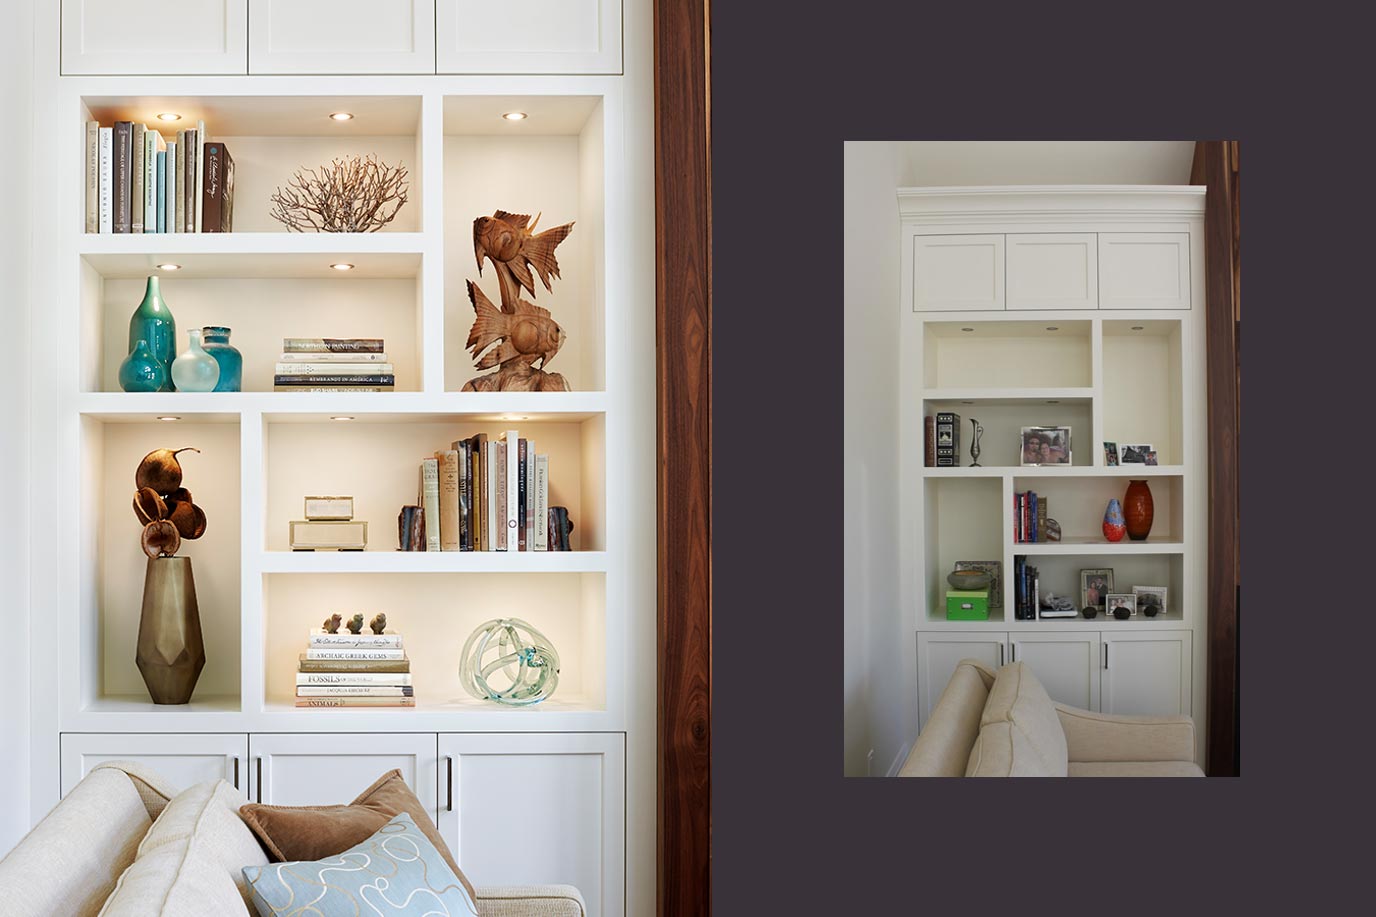 A before and after image of a bookcase, with and without accessories.